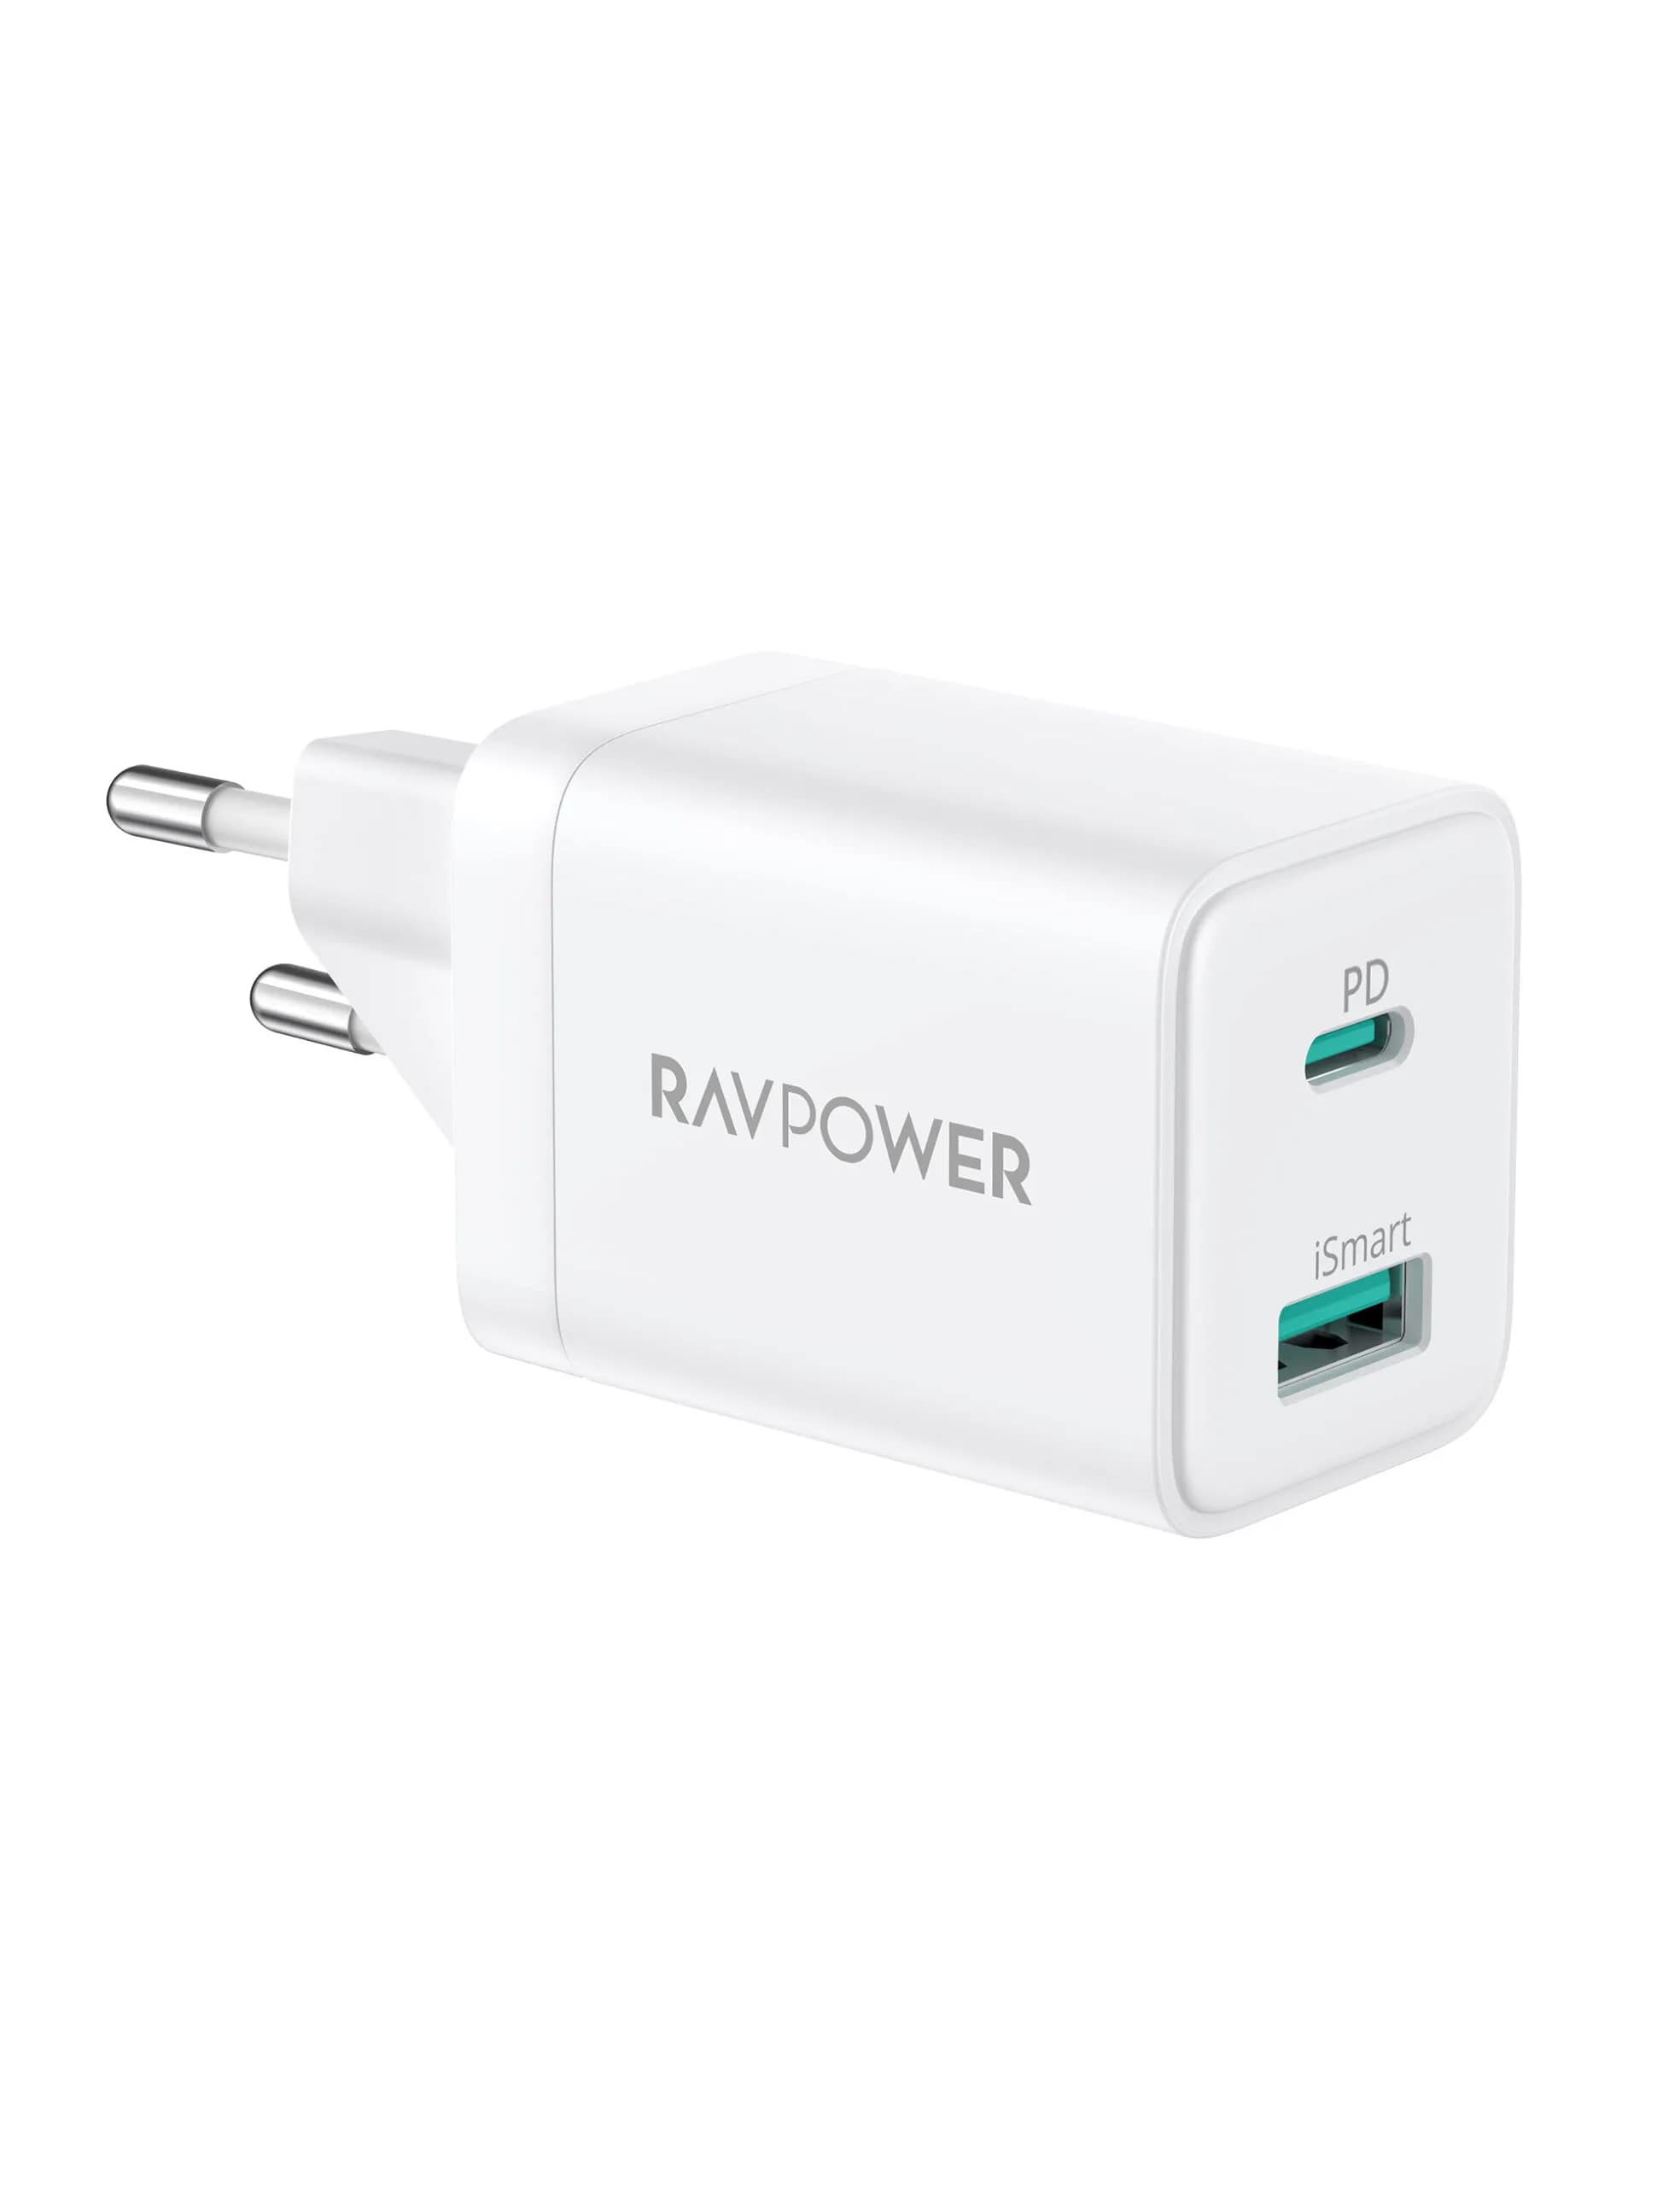 Ravpower RP-PC168 PD Pioneer 20W 2-Port Wall Charger - white